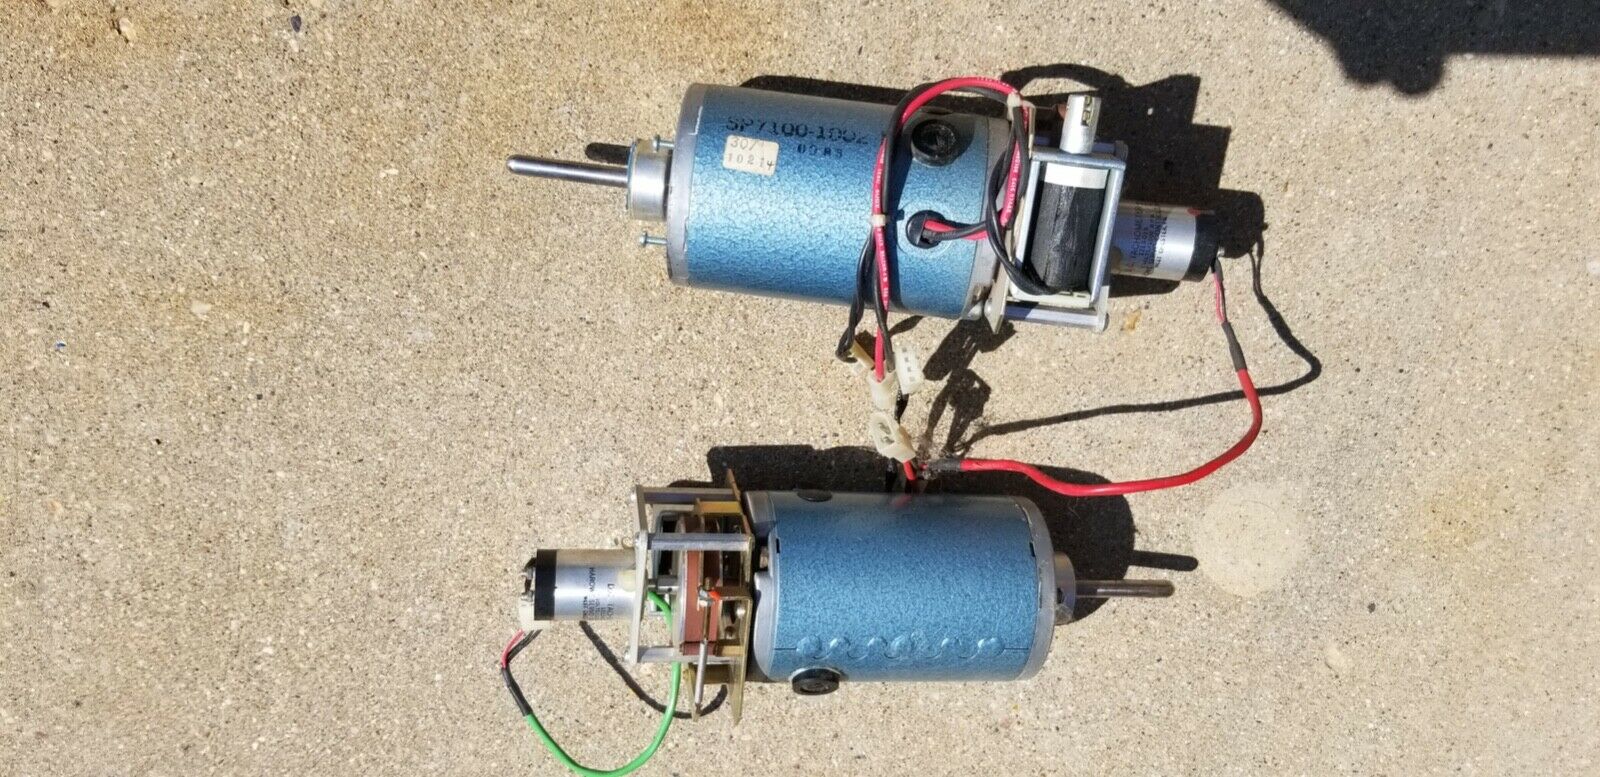 Pair Of Mci Jh-110 Reel Motors, Used In Good Condition, From Jh-110 1" Deck.